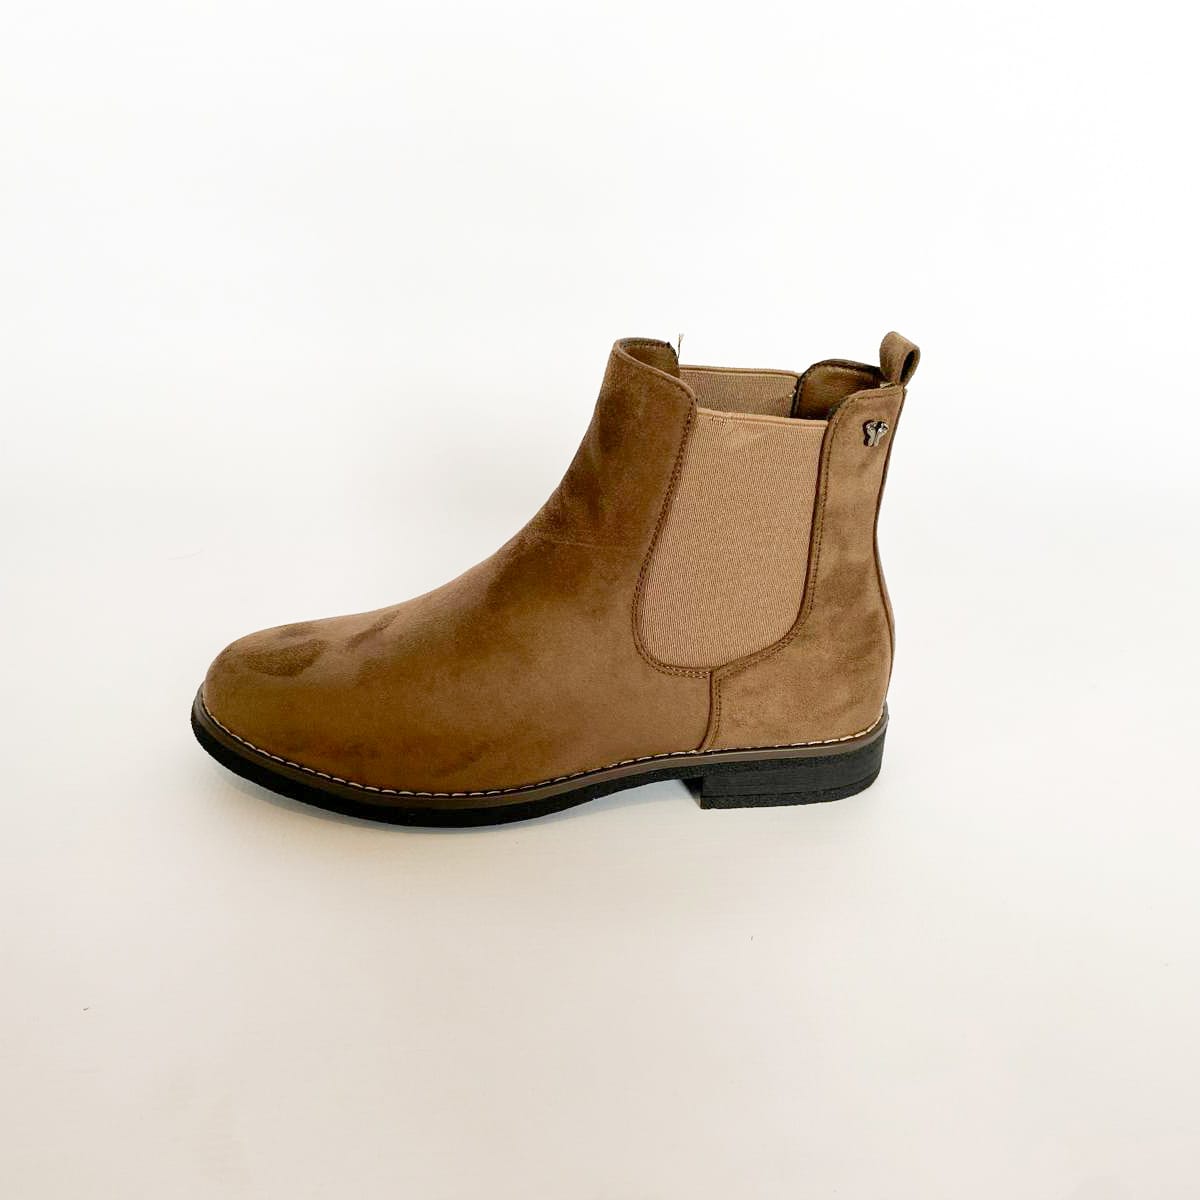 Butterfly Celeste 1 brown short suede boot